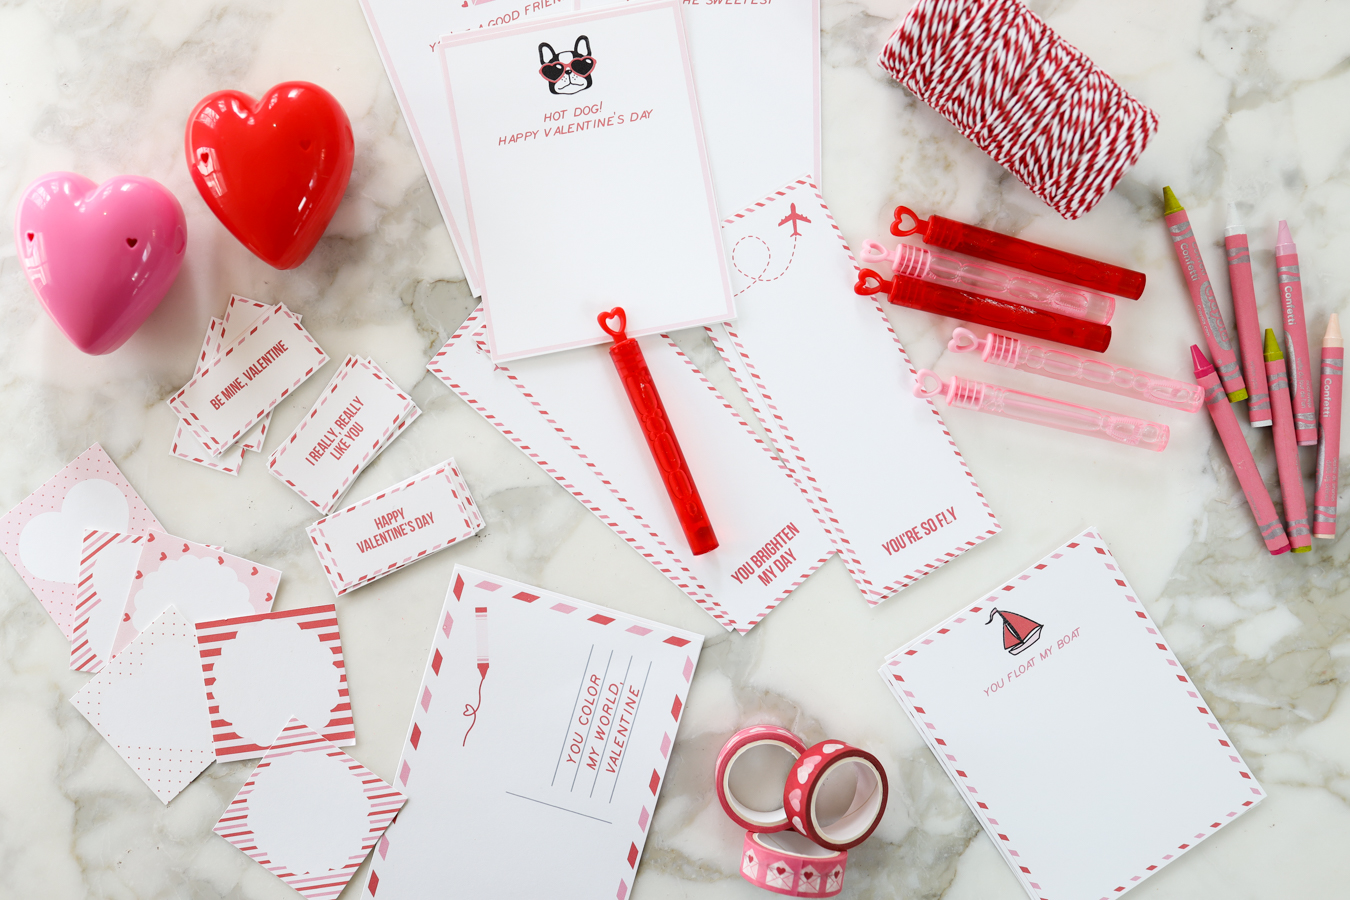 Valentine's Day Gifts for Kids and Babies